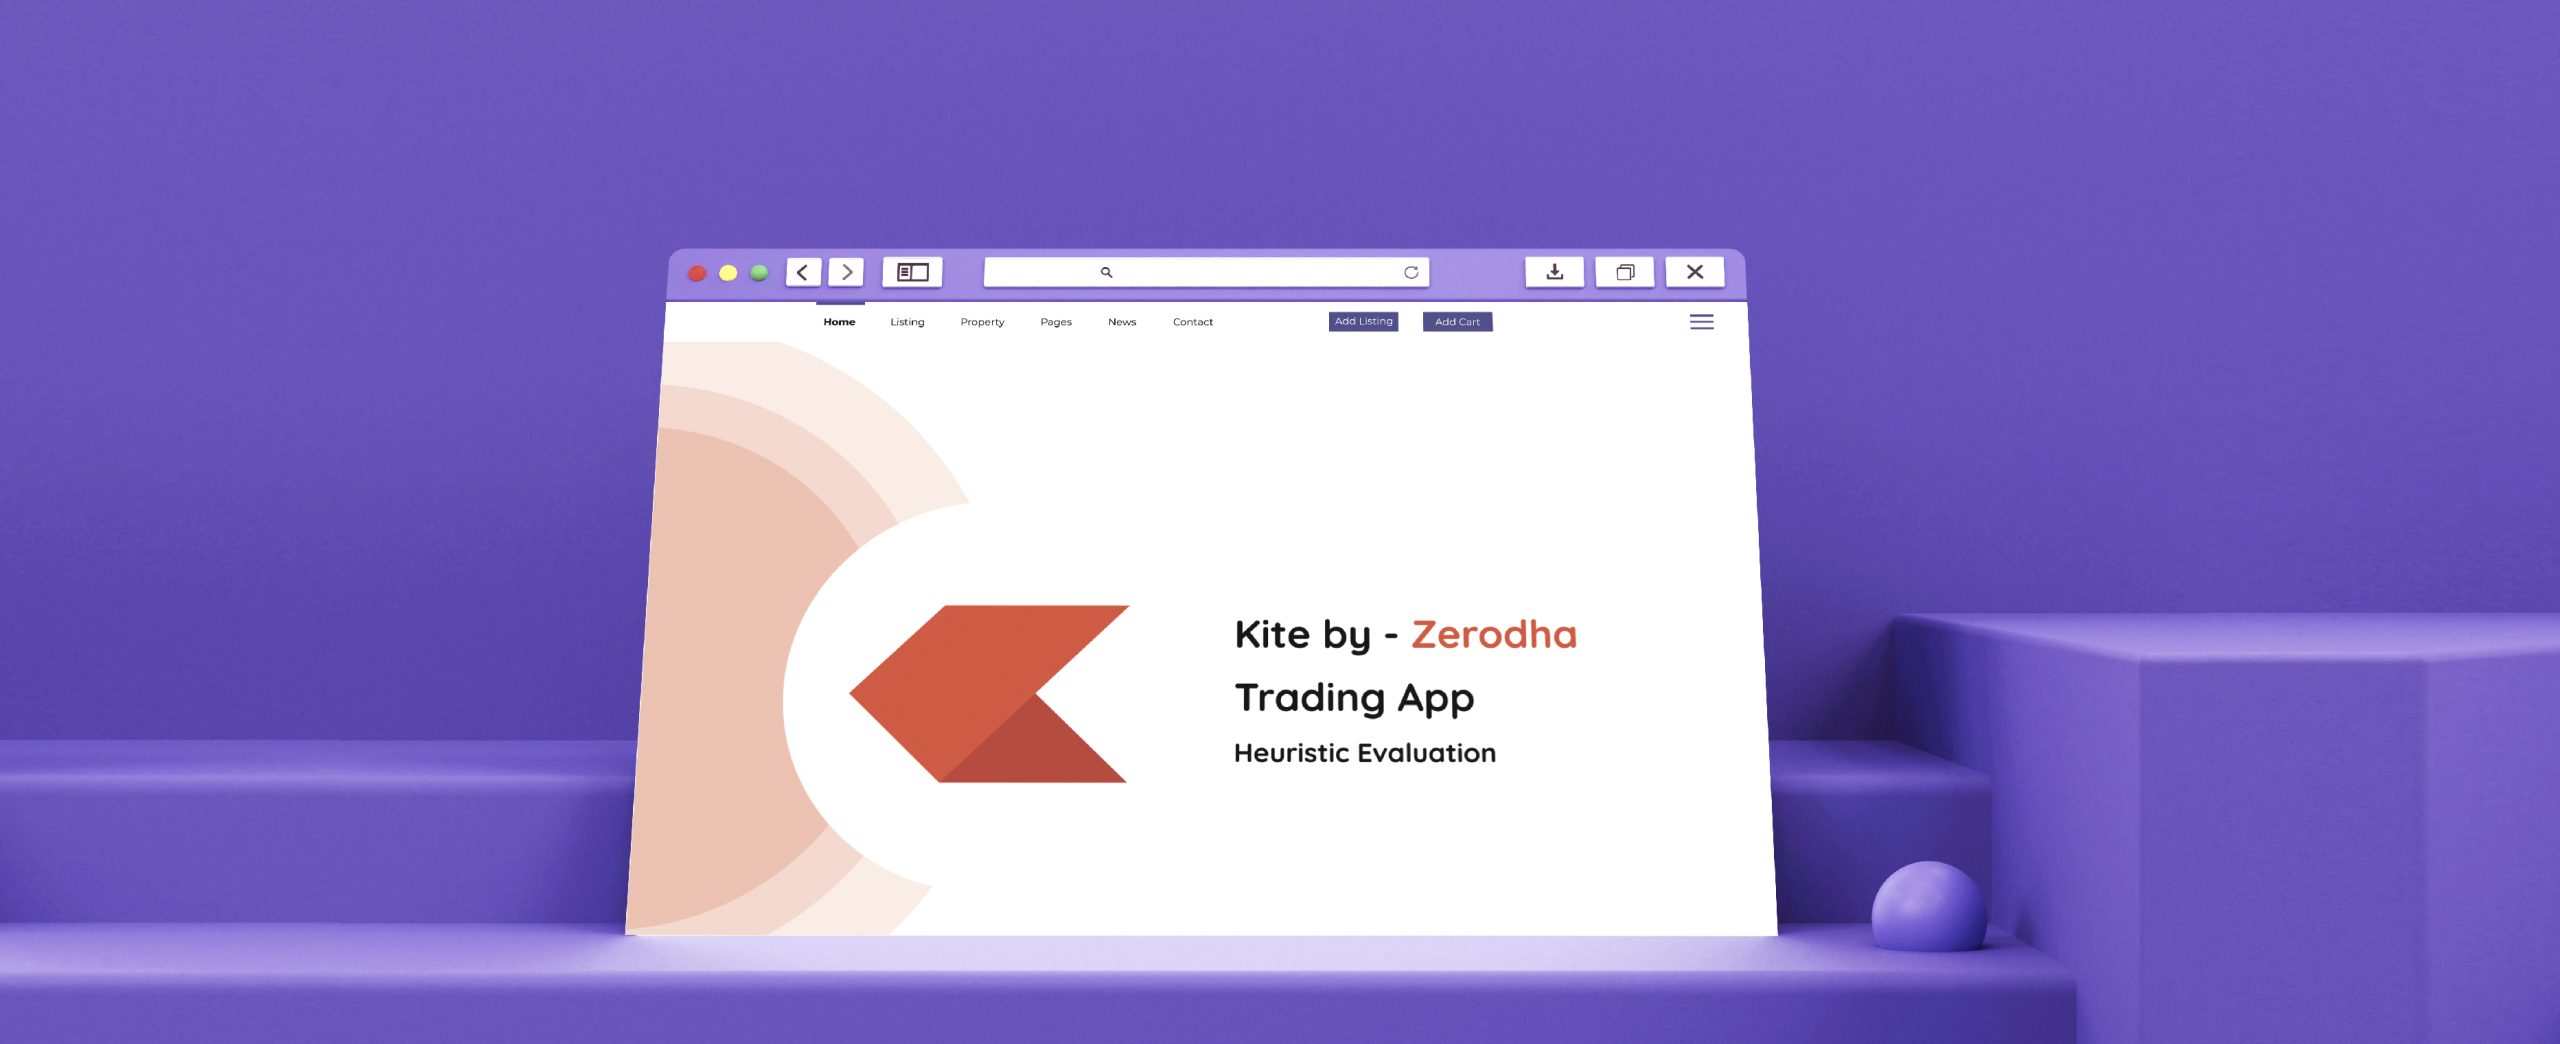 Kite by Zerodha App UX Review: 5 Tips for Them to Make It Better